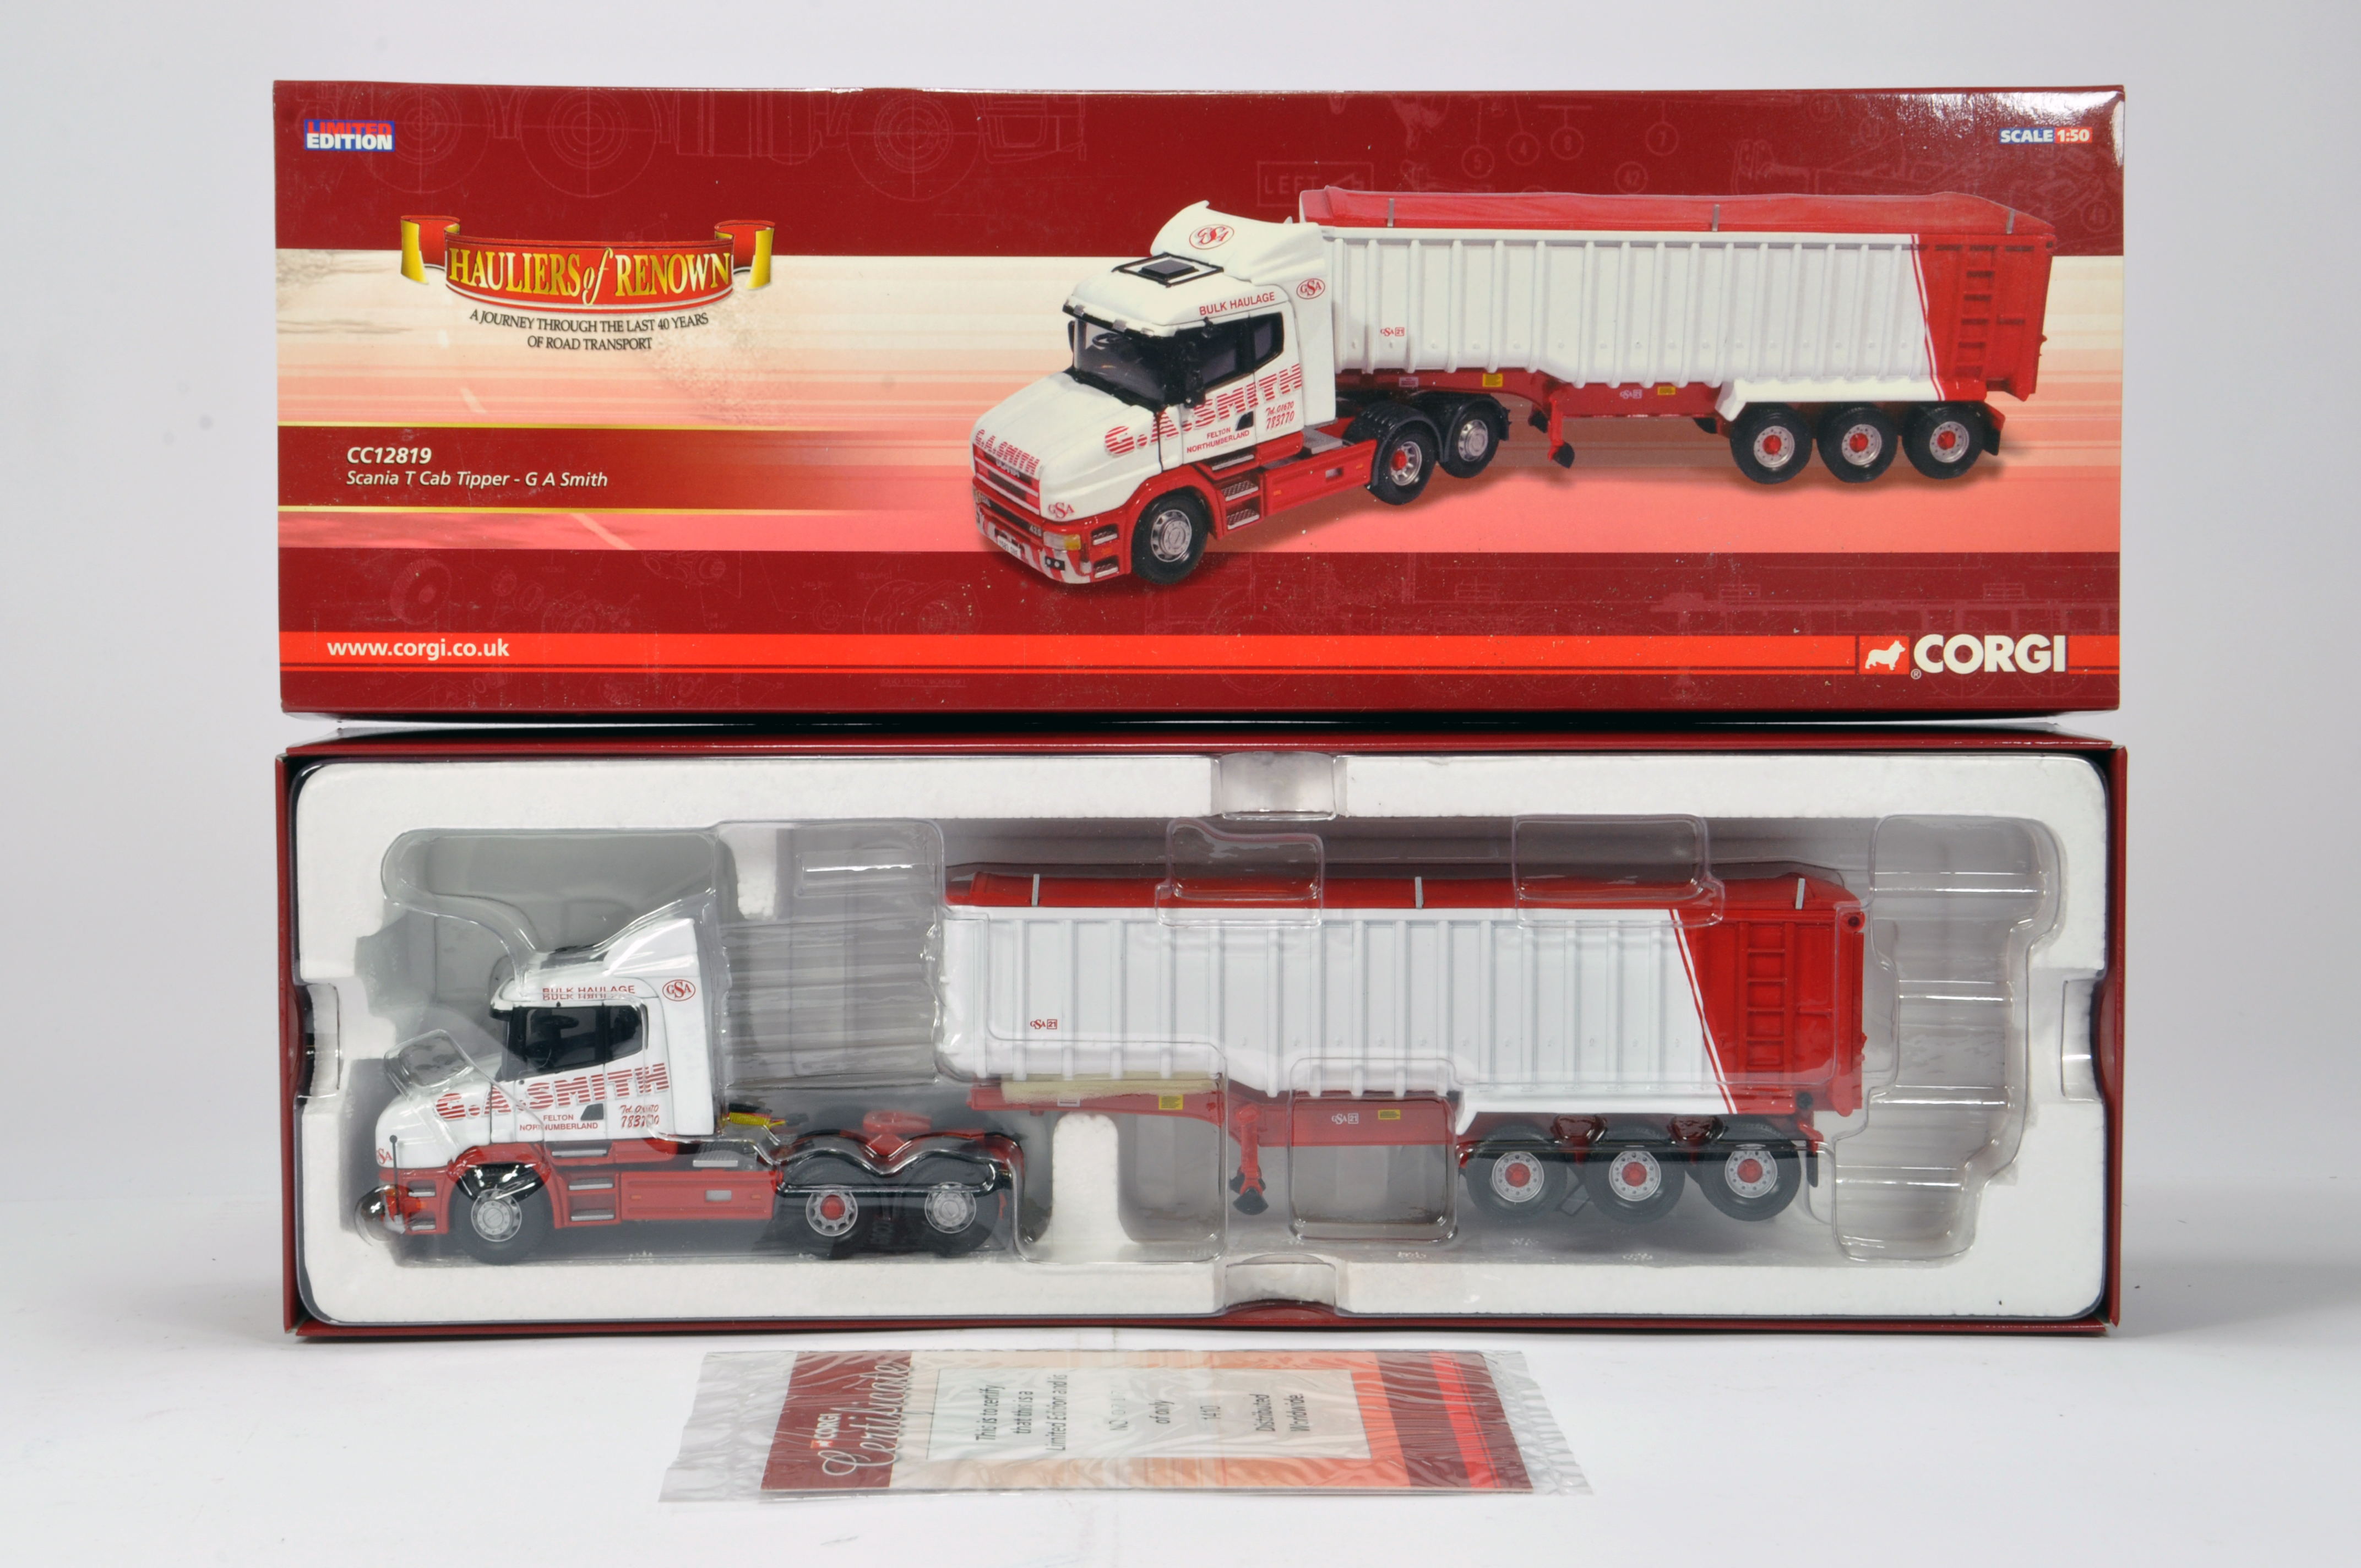 Corgi 1/50 Commercial Diecast Truck Issue comprising CC12819 Scania T Tipper. G A Smith. NM to M